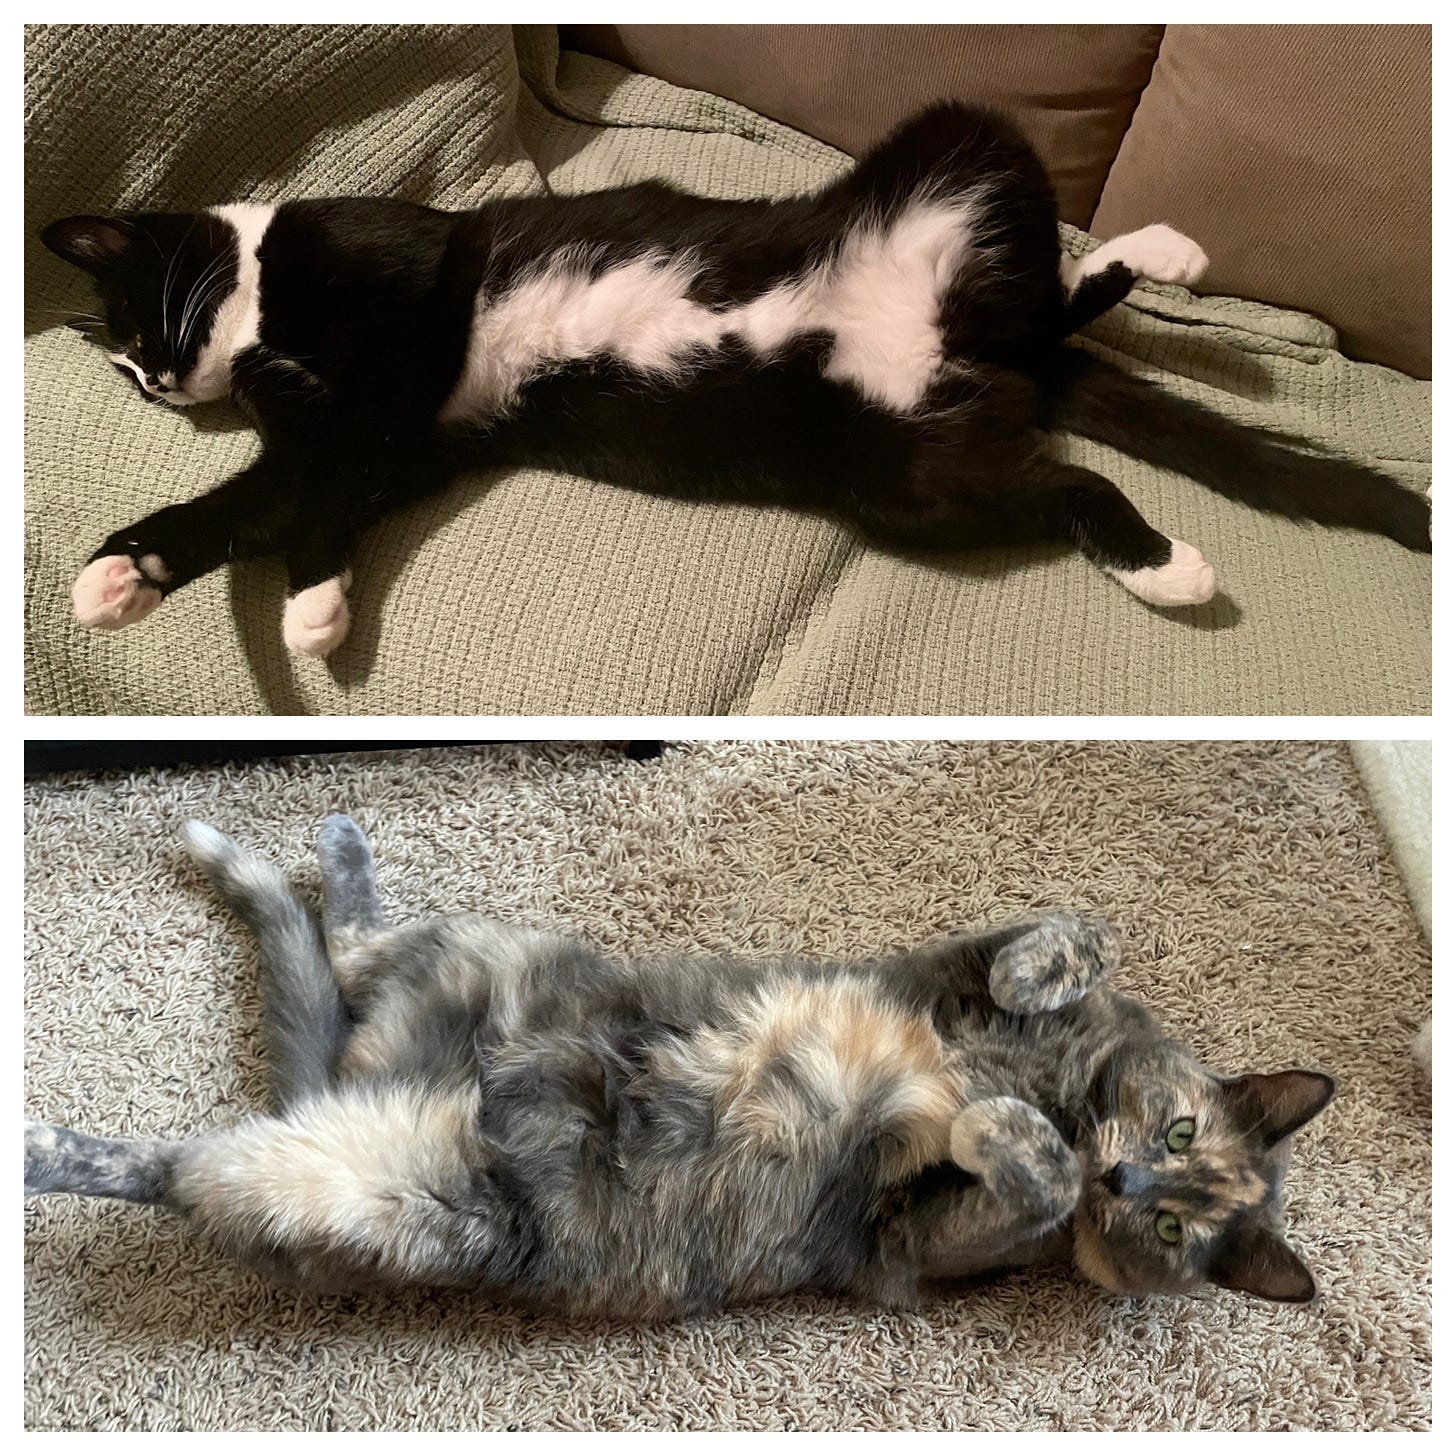 Top: A tuxedo cat is asleep on his back on a sage green blanket. Bottom: A dilute tortoiseshell cat is lying on her back on a beige carpet, looking up at the camera.